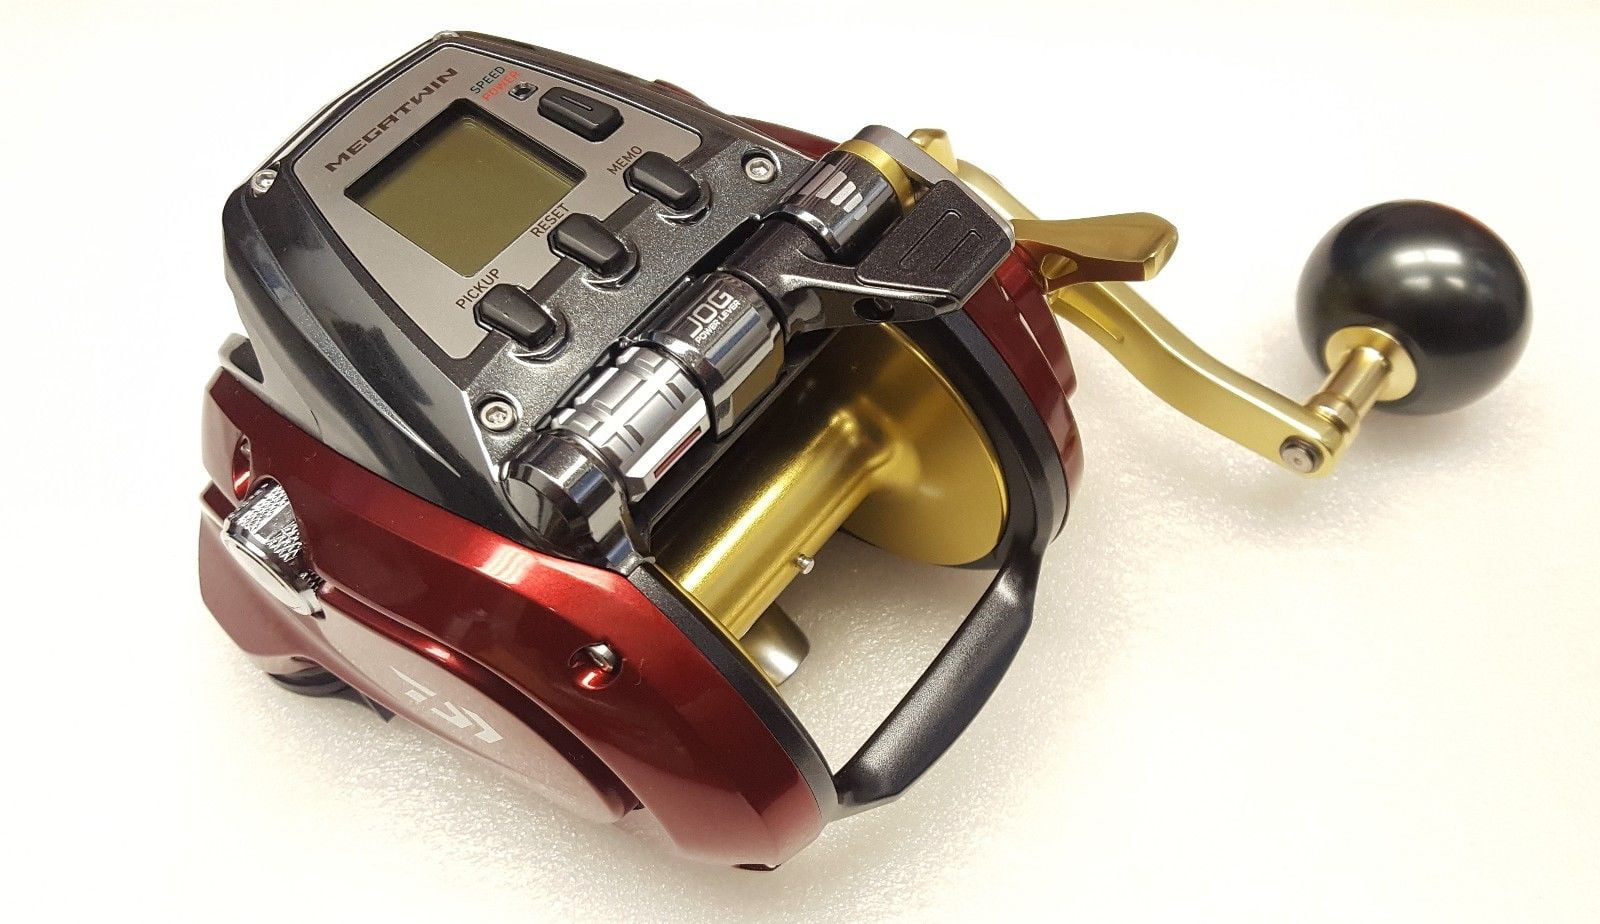 DAIWA Electric Reel Seaborg 800MJS (Right Handle) 2019 Model - Discovery  Japan Mall